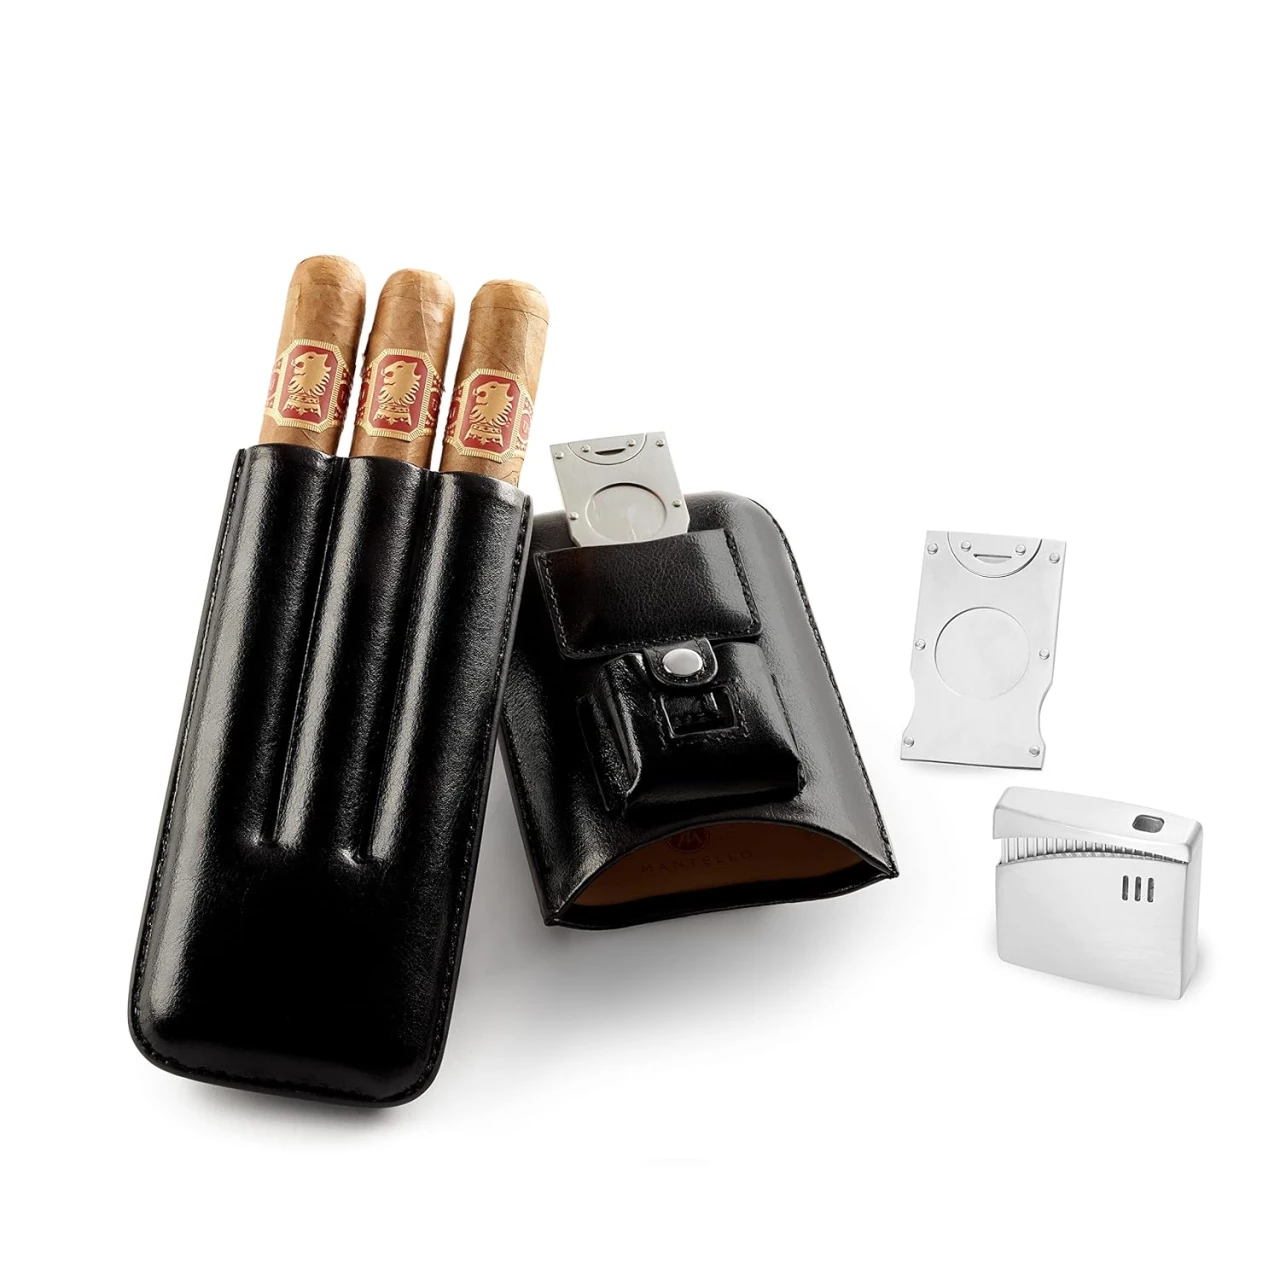 Mantello Luxury Portable 3 Holder Cigar Case Set with Cigar Cutter and Lighter Set